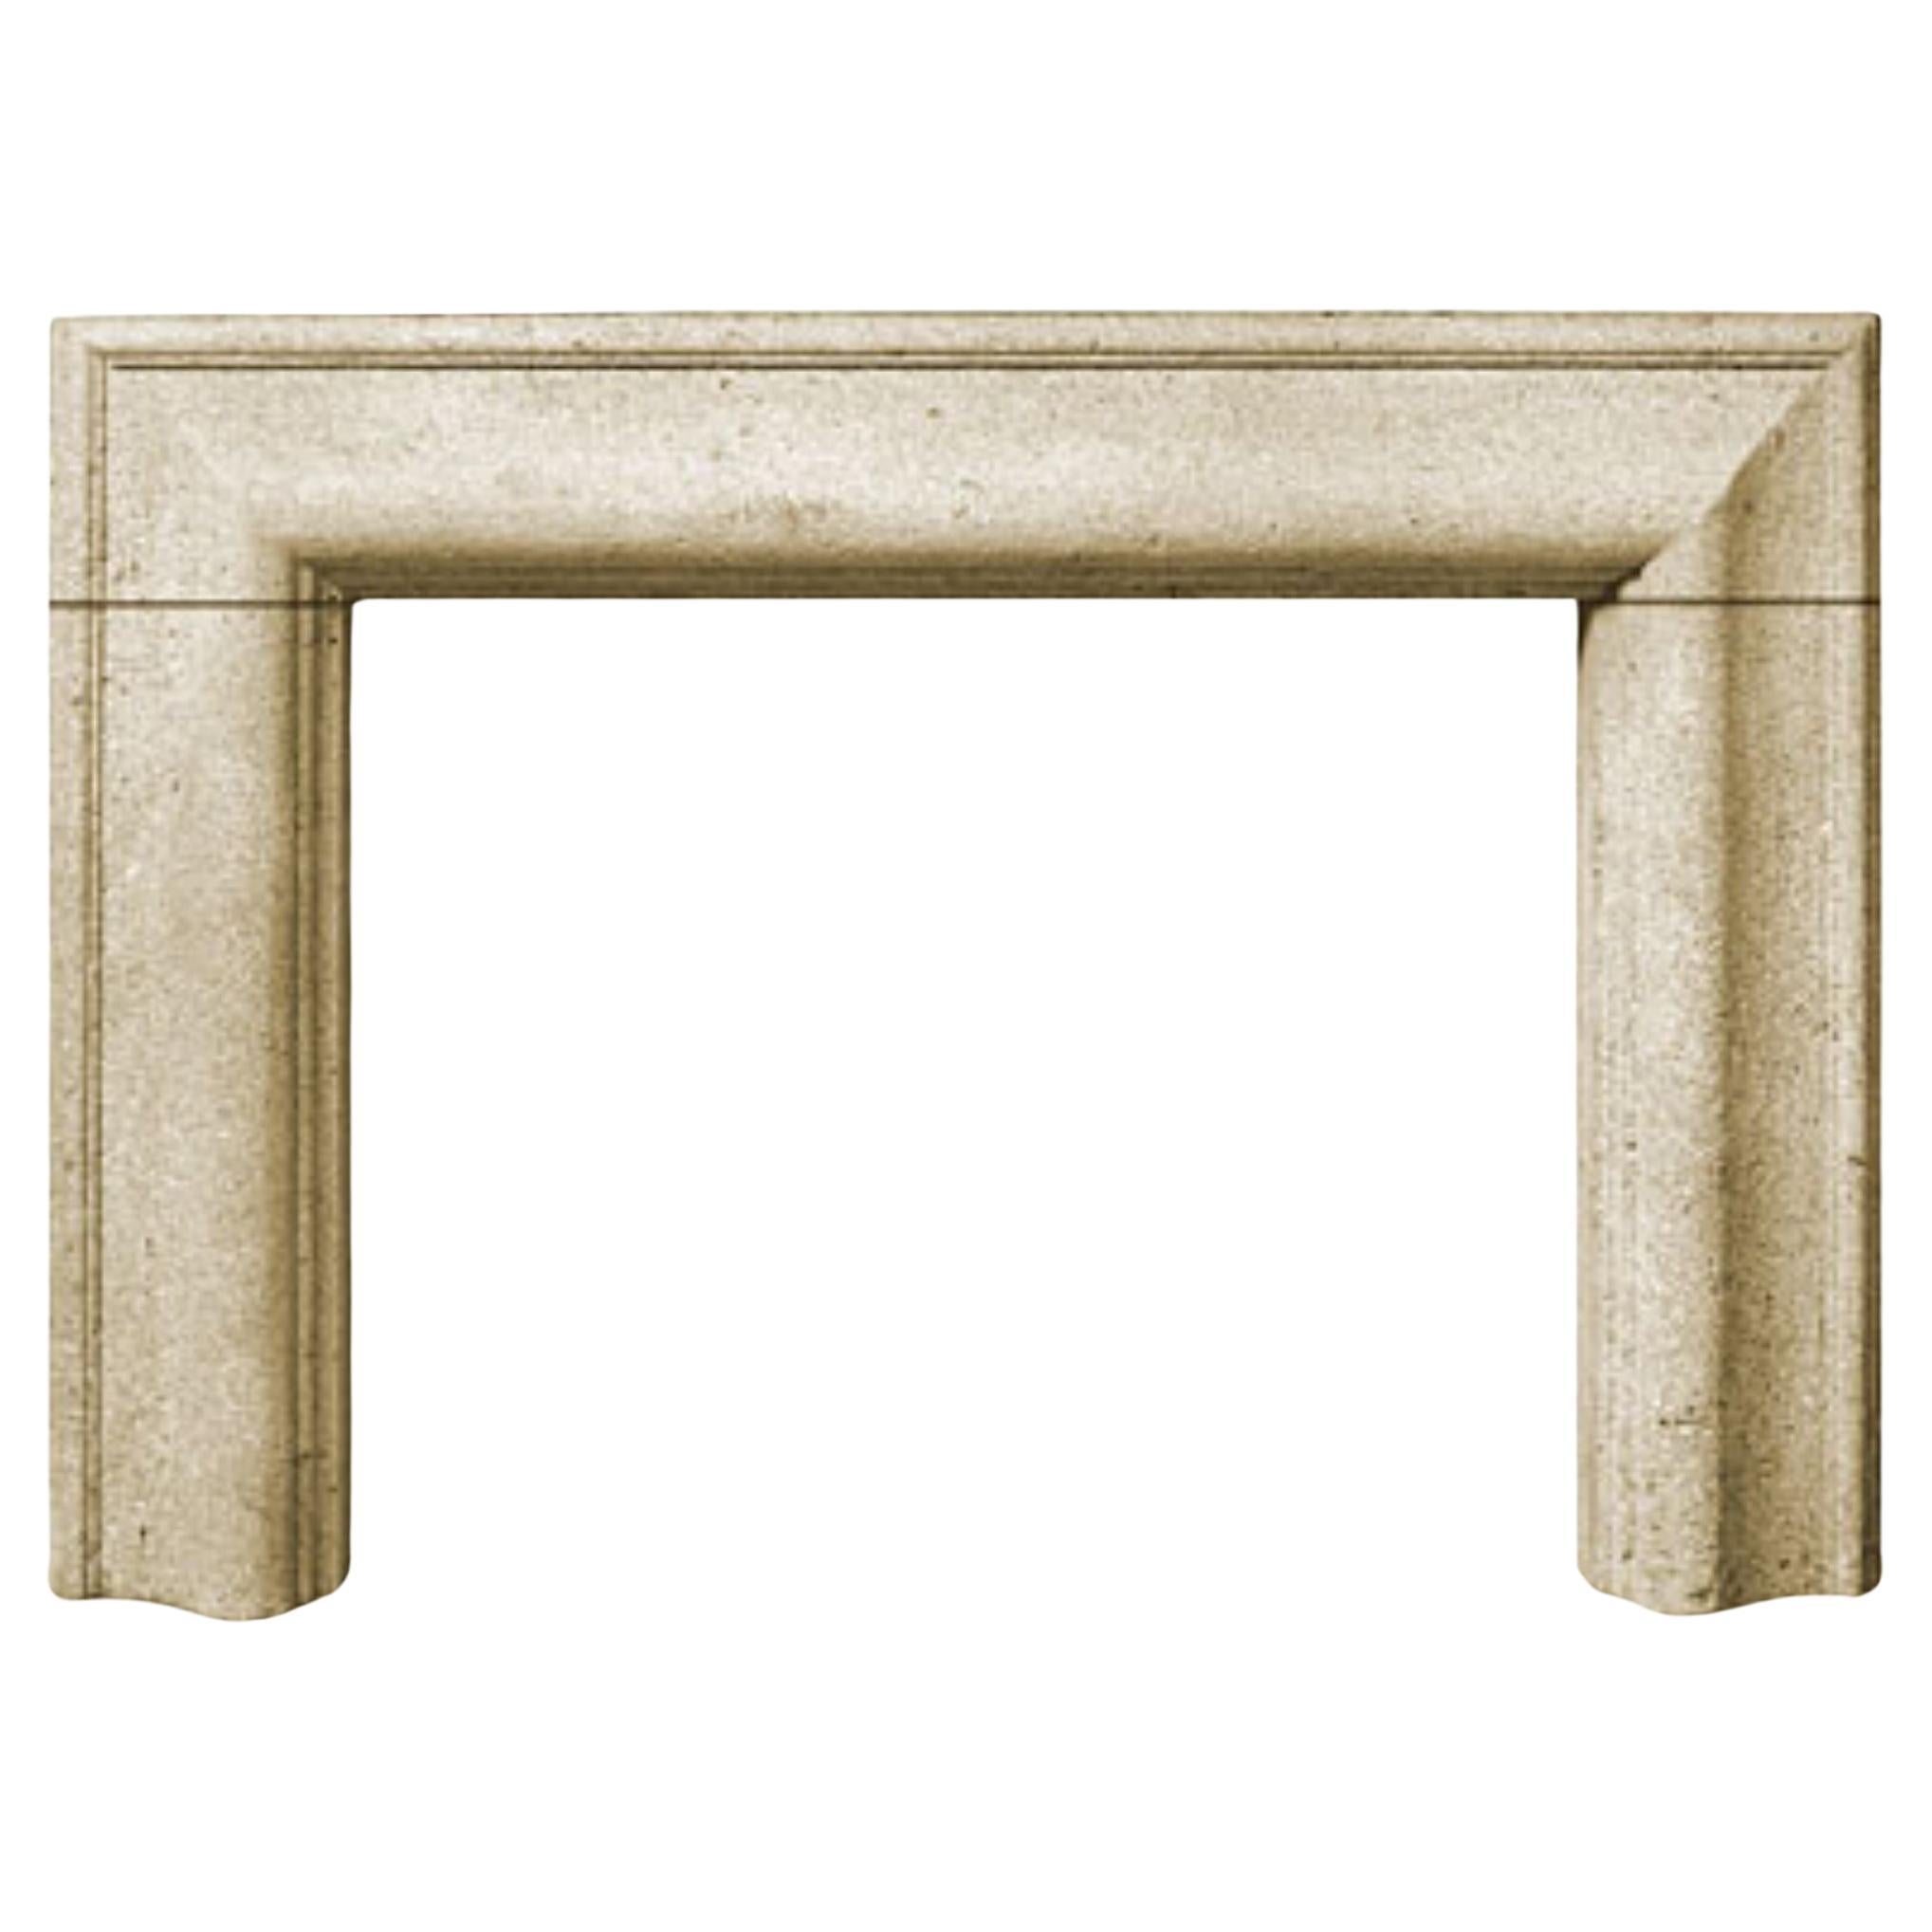 The Bolection A: A Classical Stone Fireplace Profile Without Shelf or Plinths For Sale